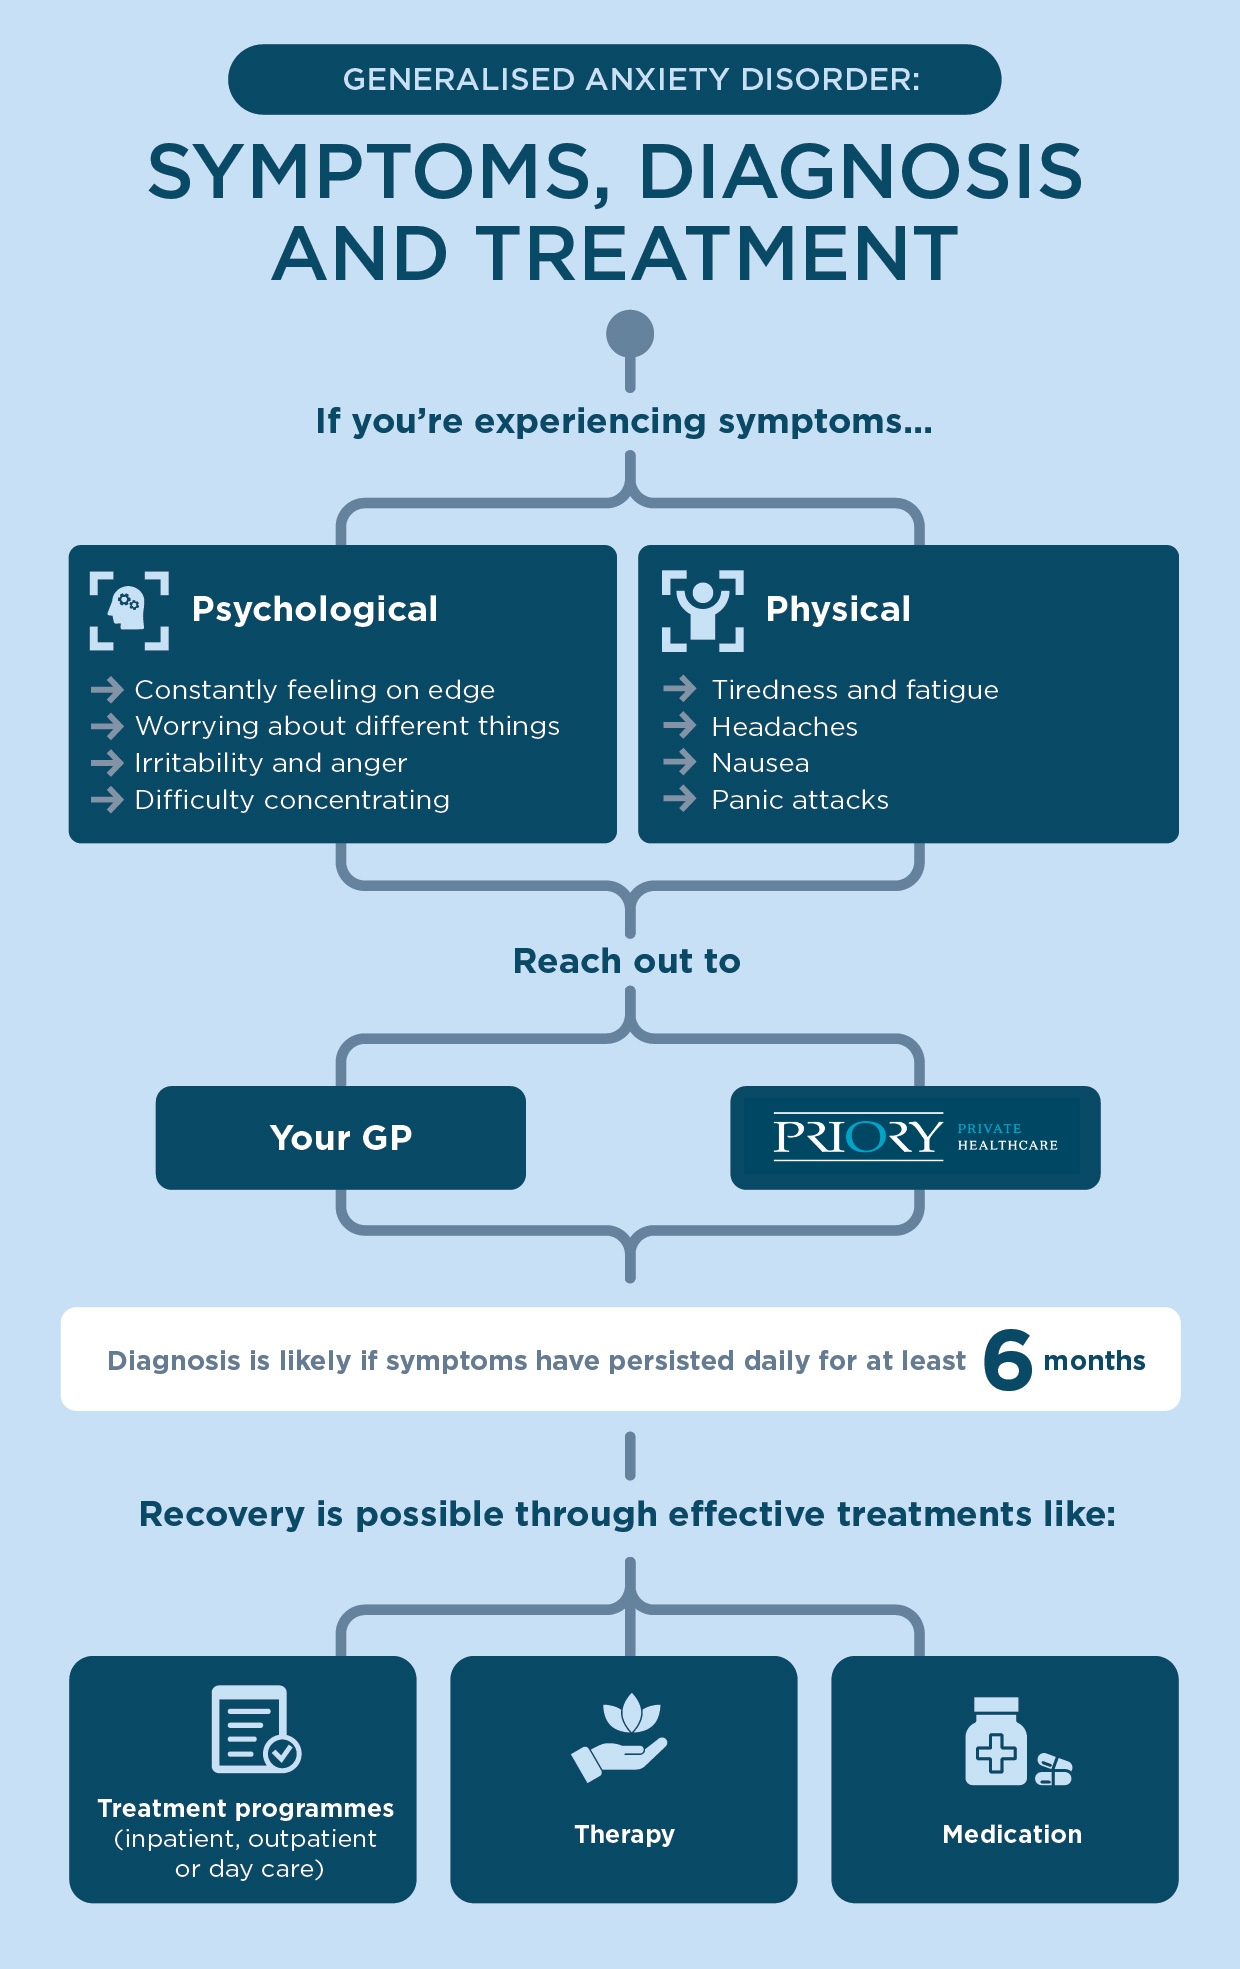 symptoms diagnosis and treatment for GAD